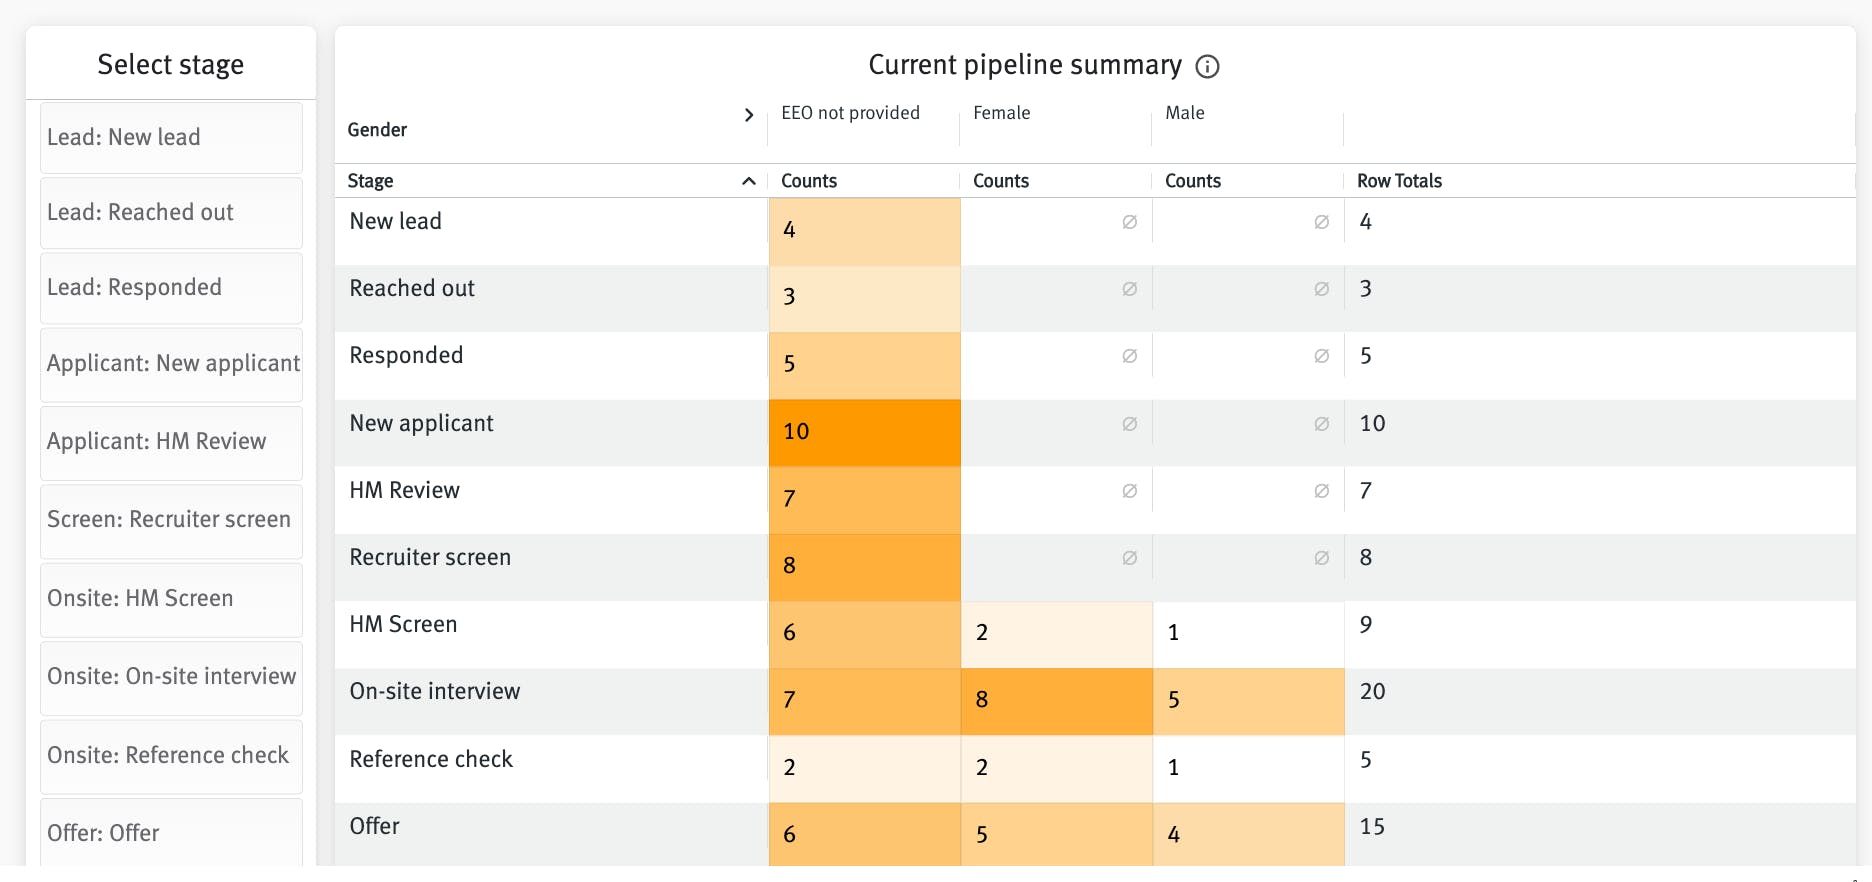 Screenshot of current pipeline summary report. Shows a bar graph with counts of candidates per stage of the pipeline by gender.